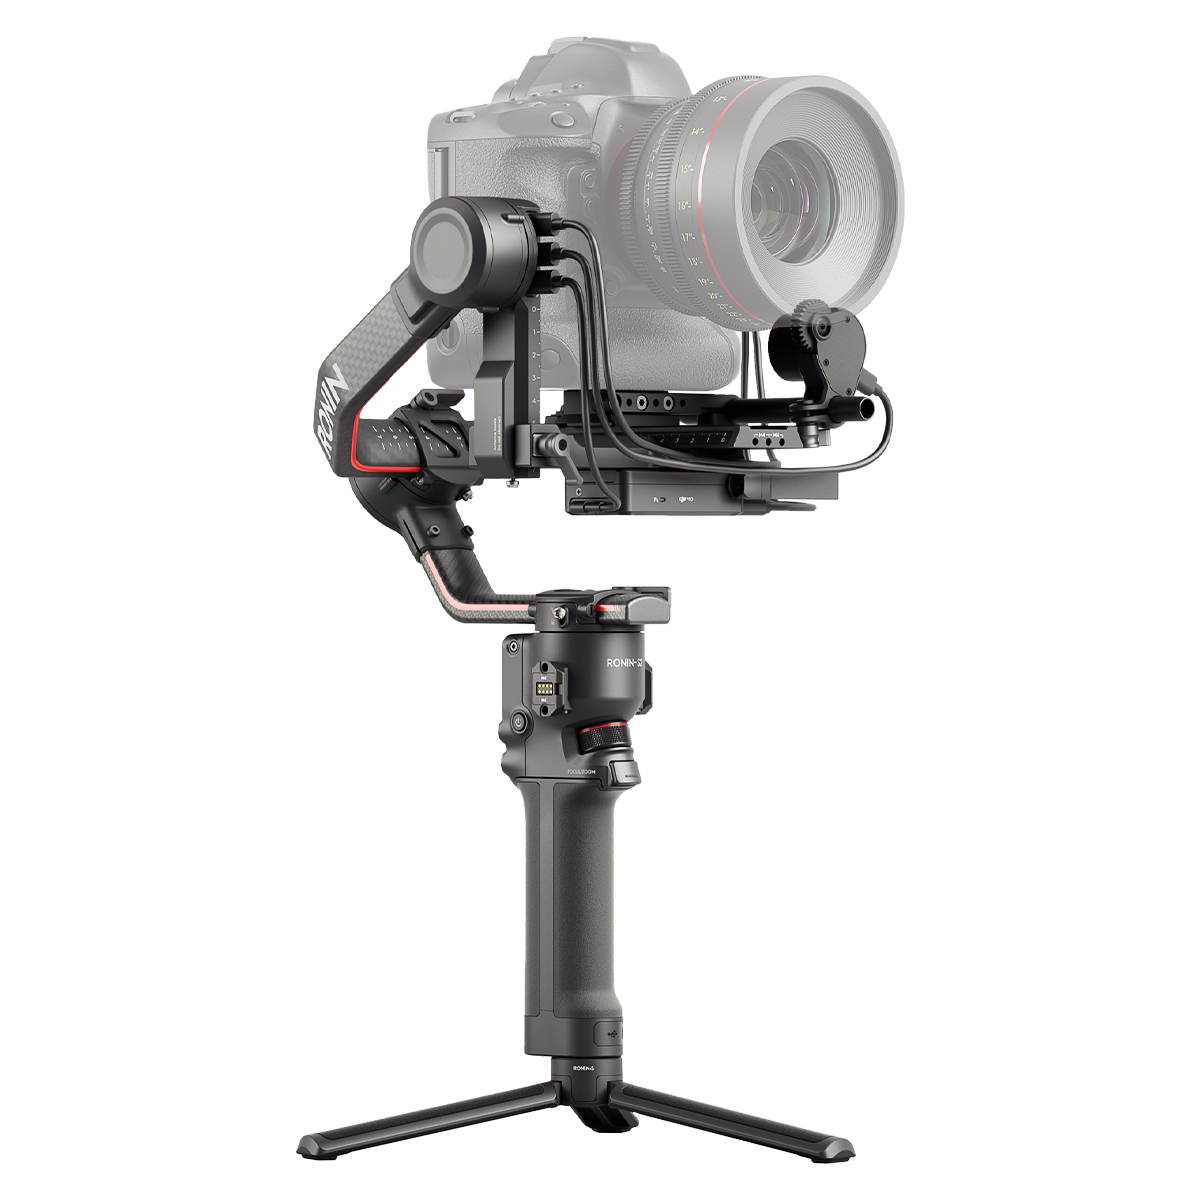 DJI RS 2 Pro Combo Handheld Gimbal Stabilizer for DSLR and Cinema Cameras